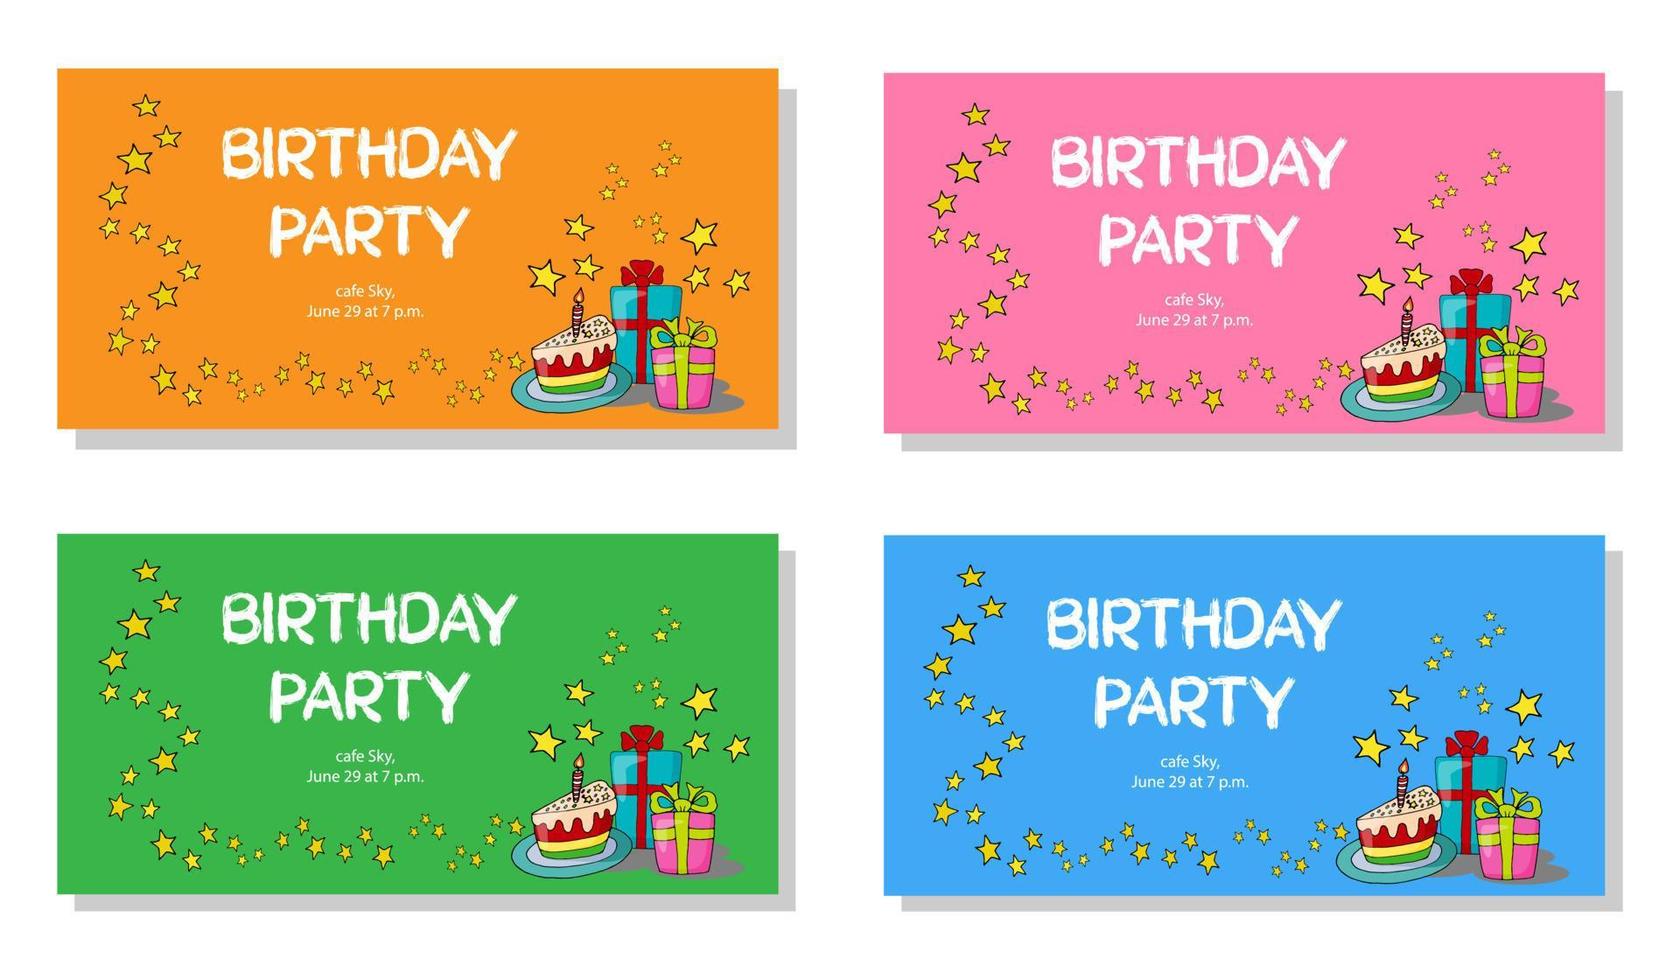 vector illustration set of an invitations to a birthday party - cake and gifts with a garland of stars on orange, pink, green and blue backgrounds